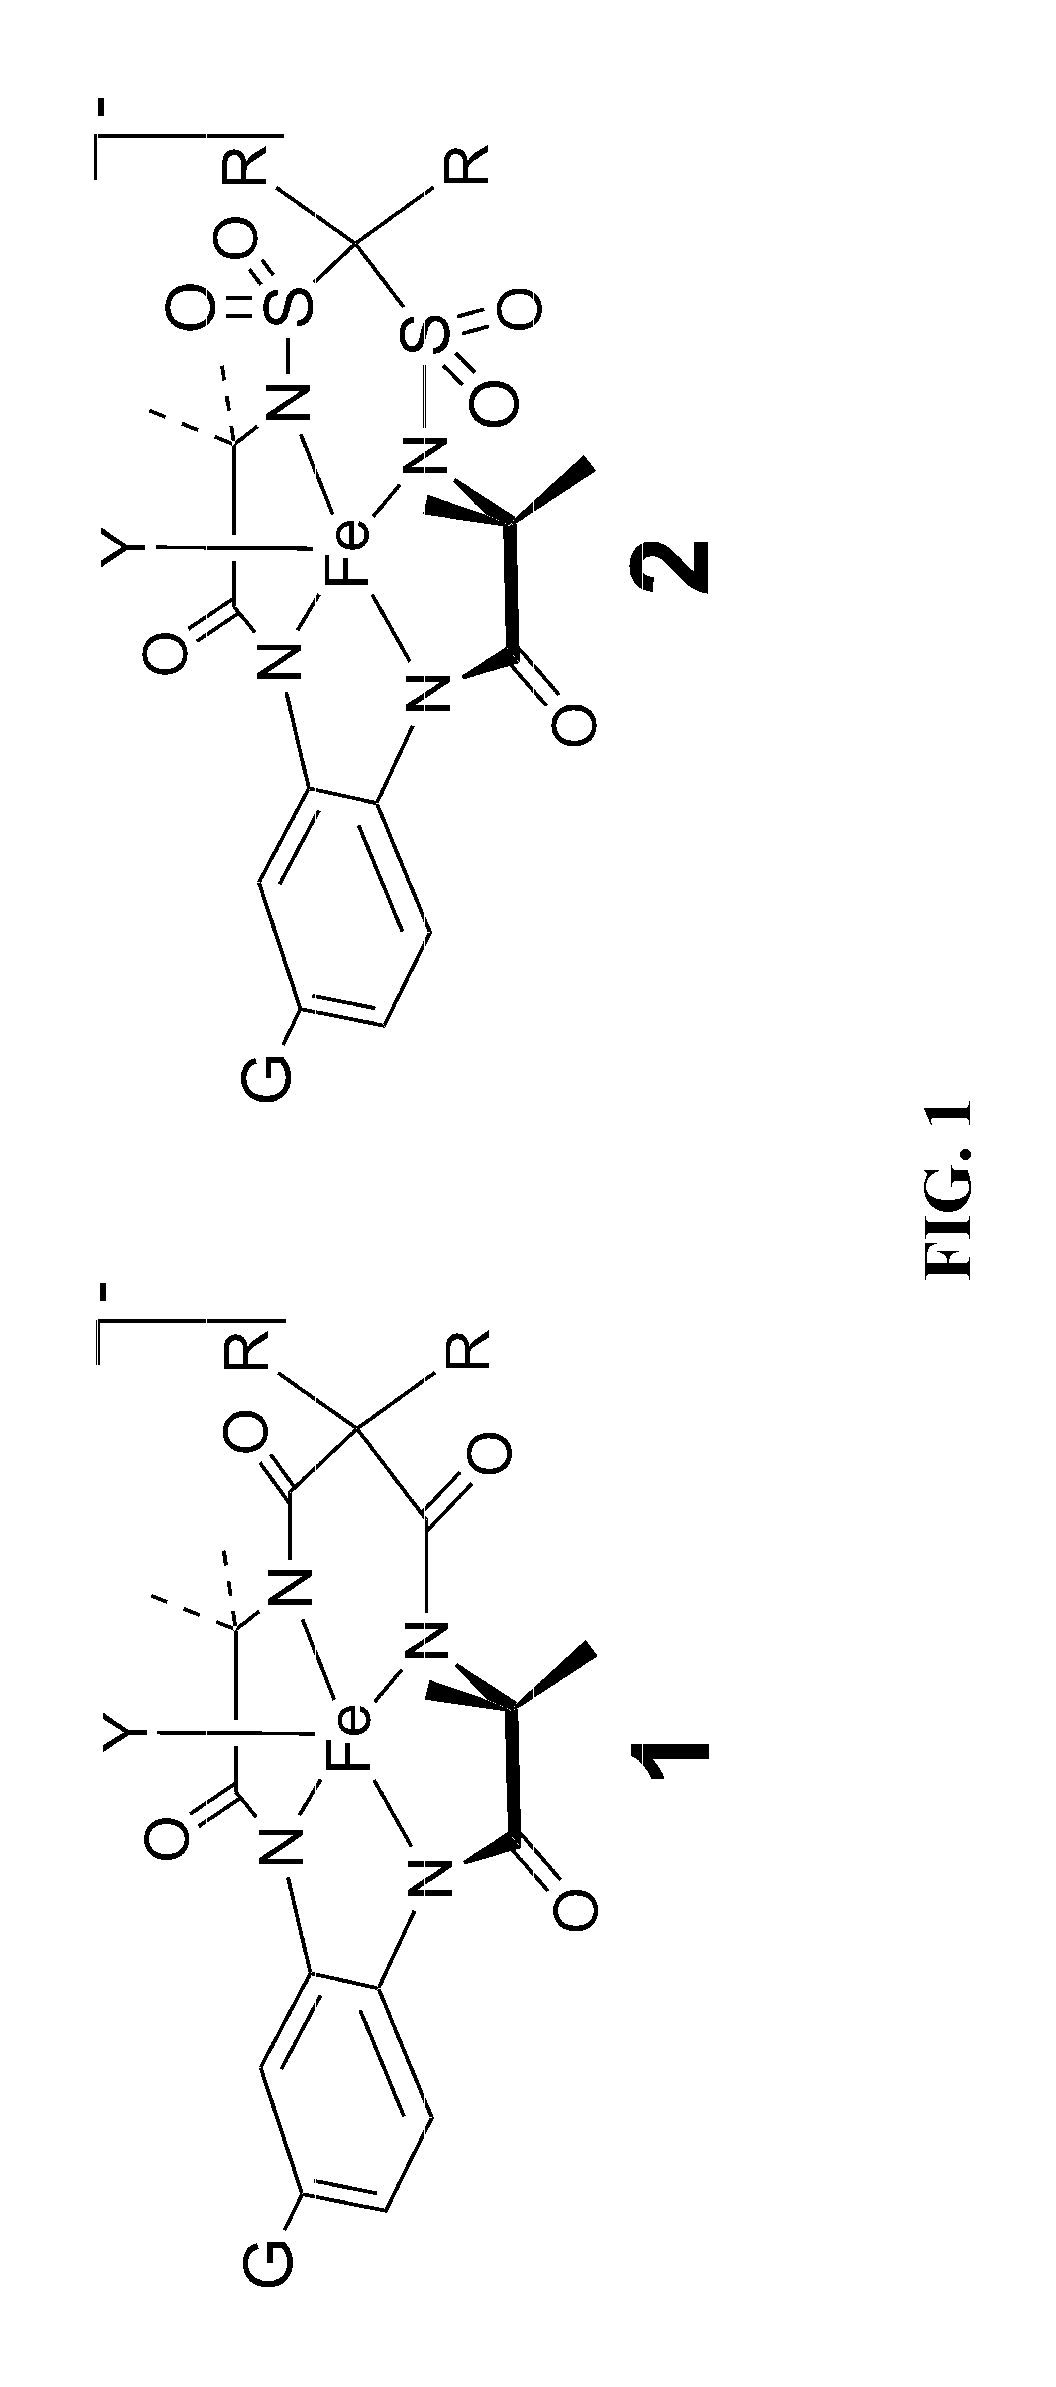 Far superior oxidation catalysts based on macrocyclic compounds